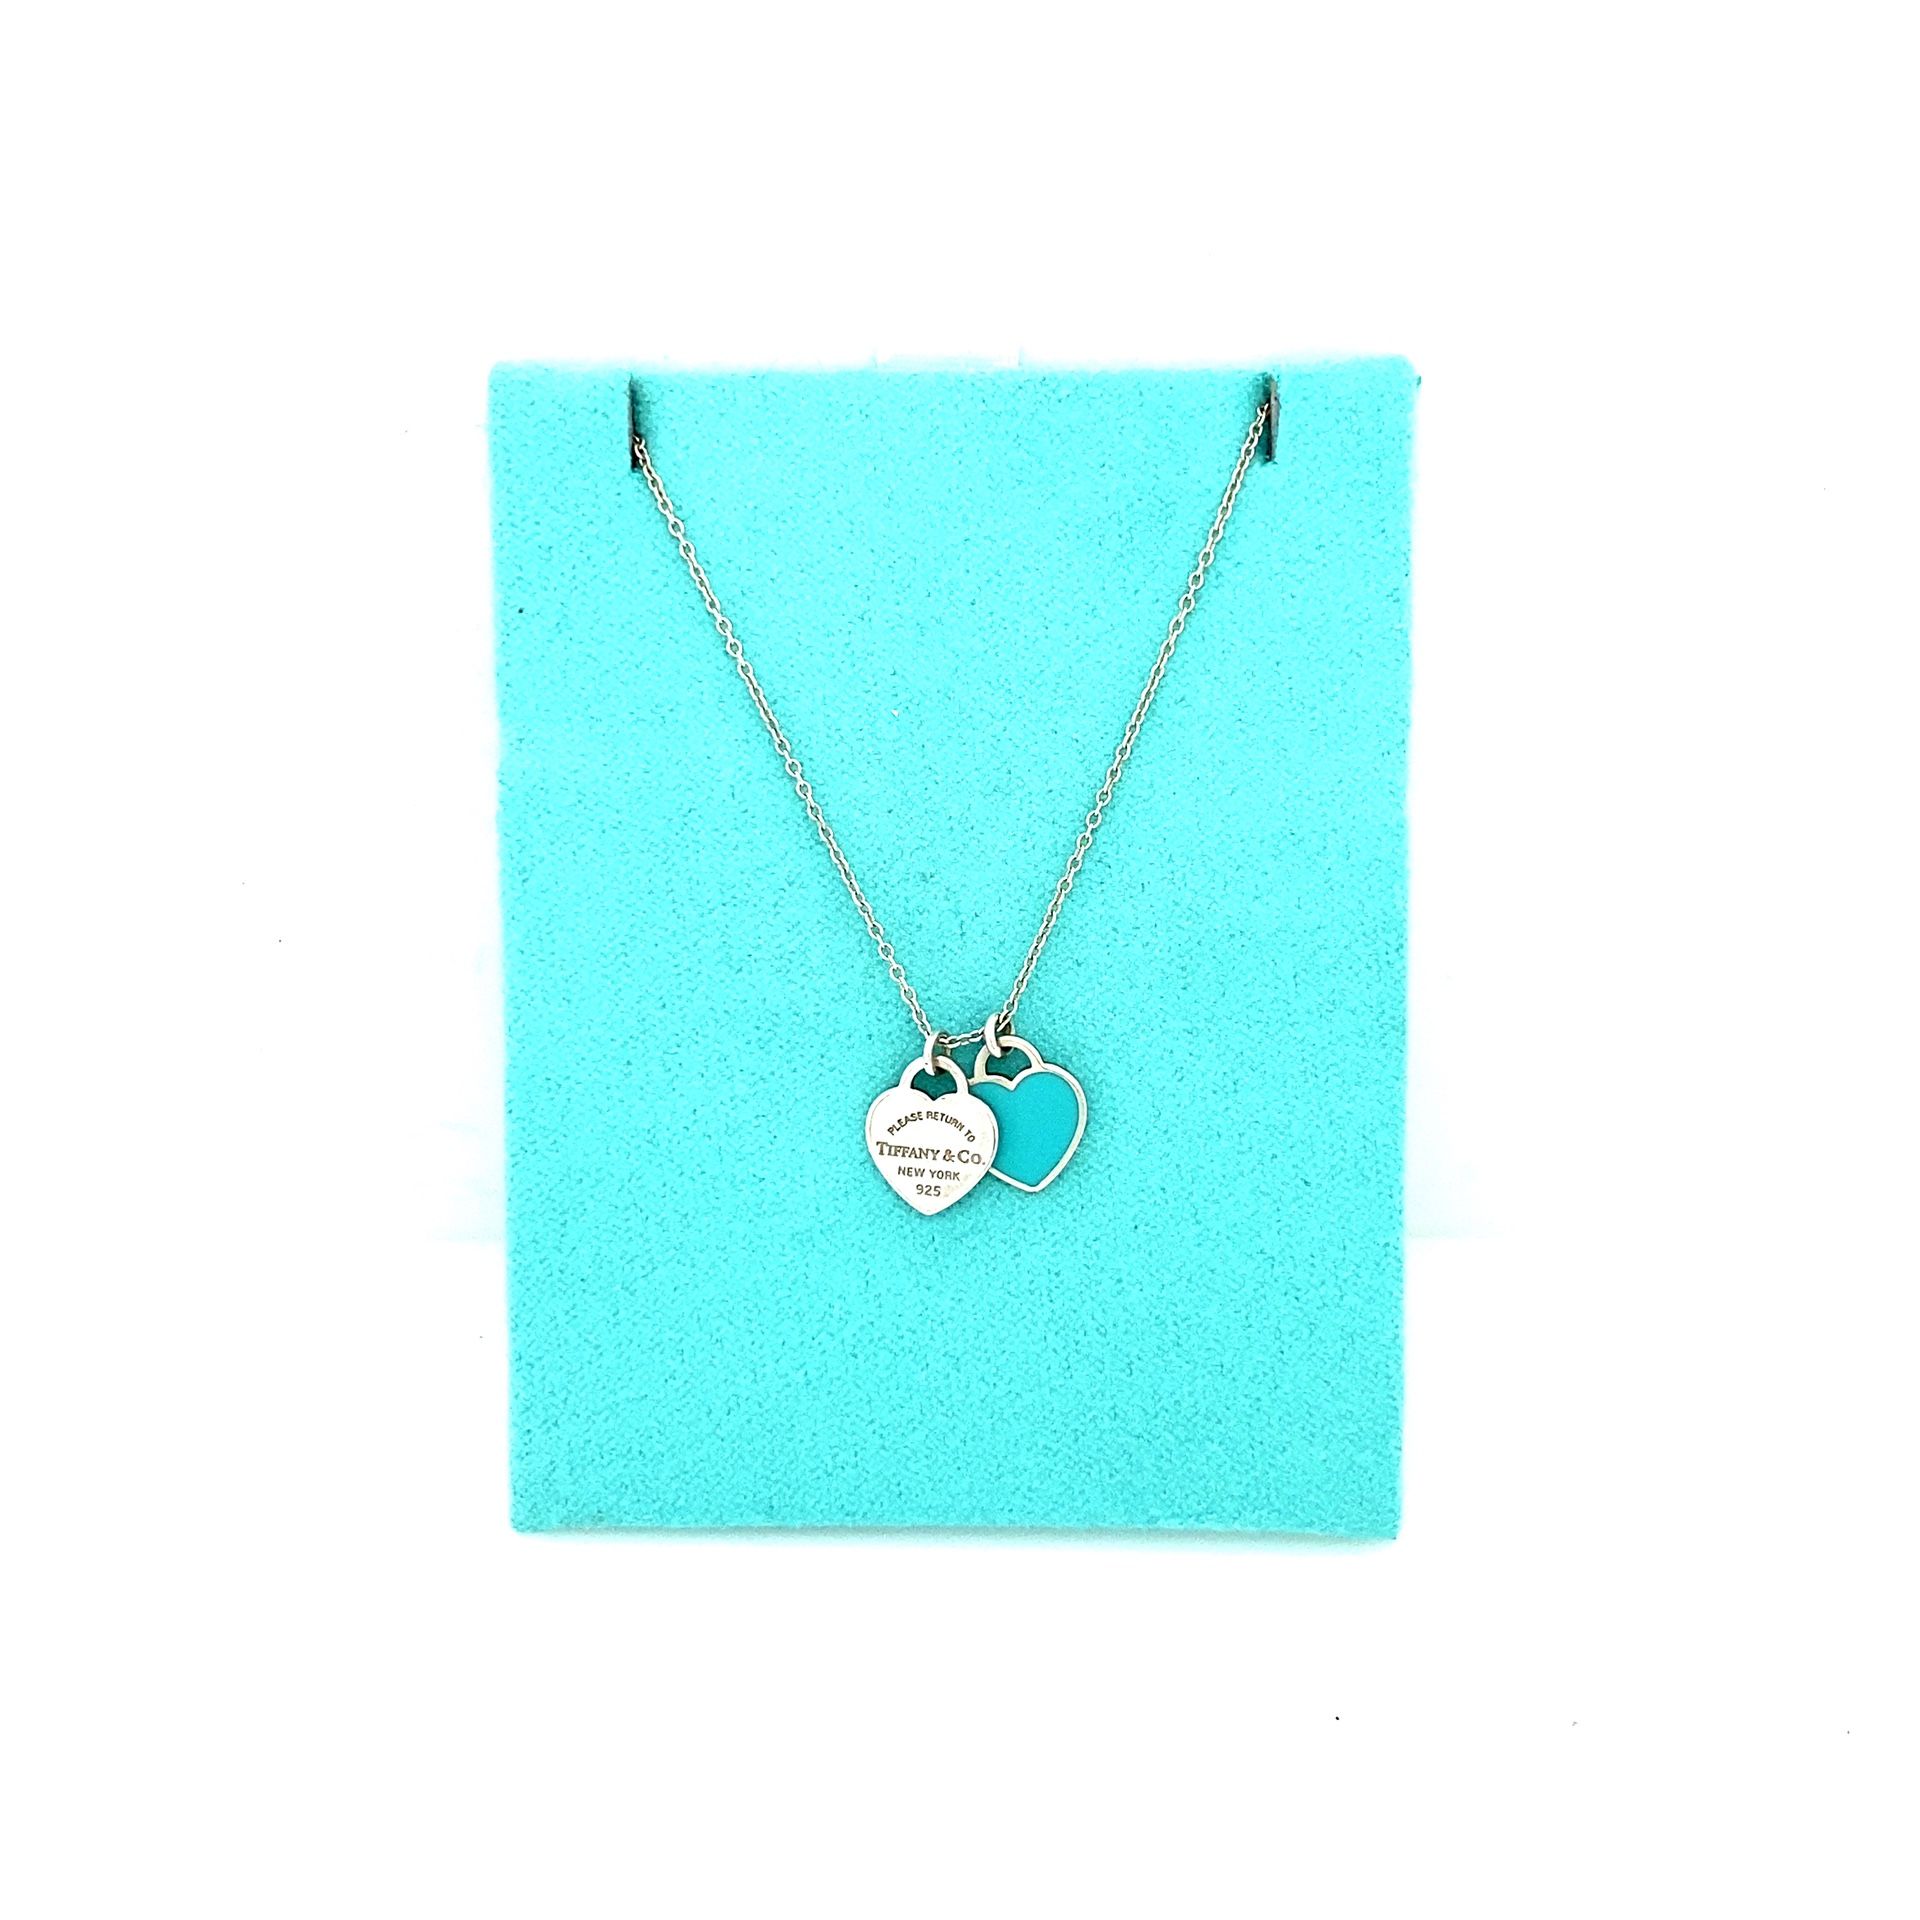 Tiffany And Co. Teal Necklace